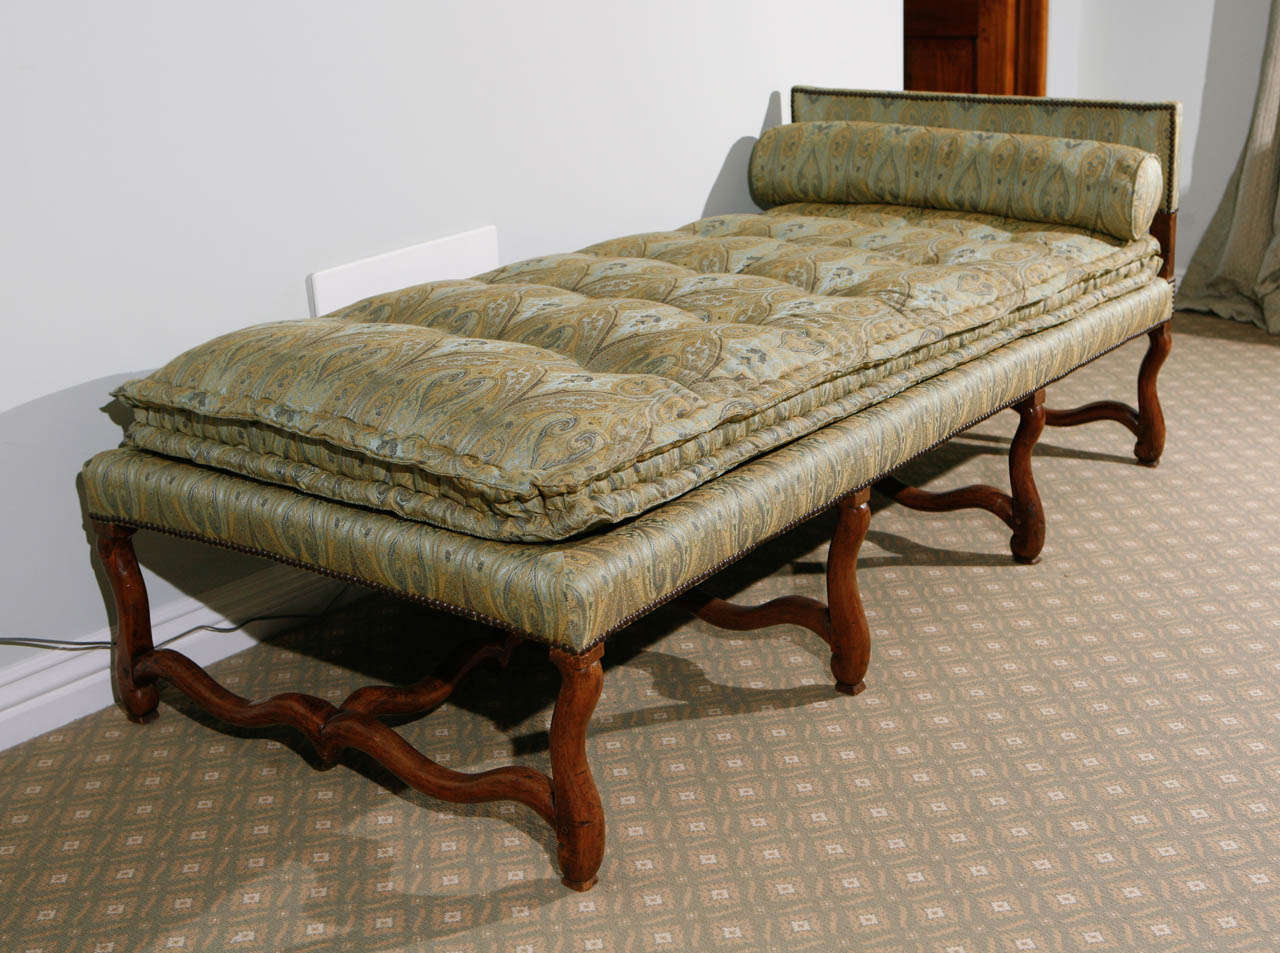 18th century French Walnut Os du Mouton Chaise.  The Chaise has been upholstered in green paisley silk fabric.  The head board measurement  is 27.5 inches high.